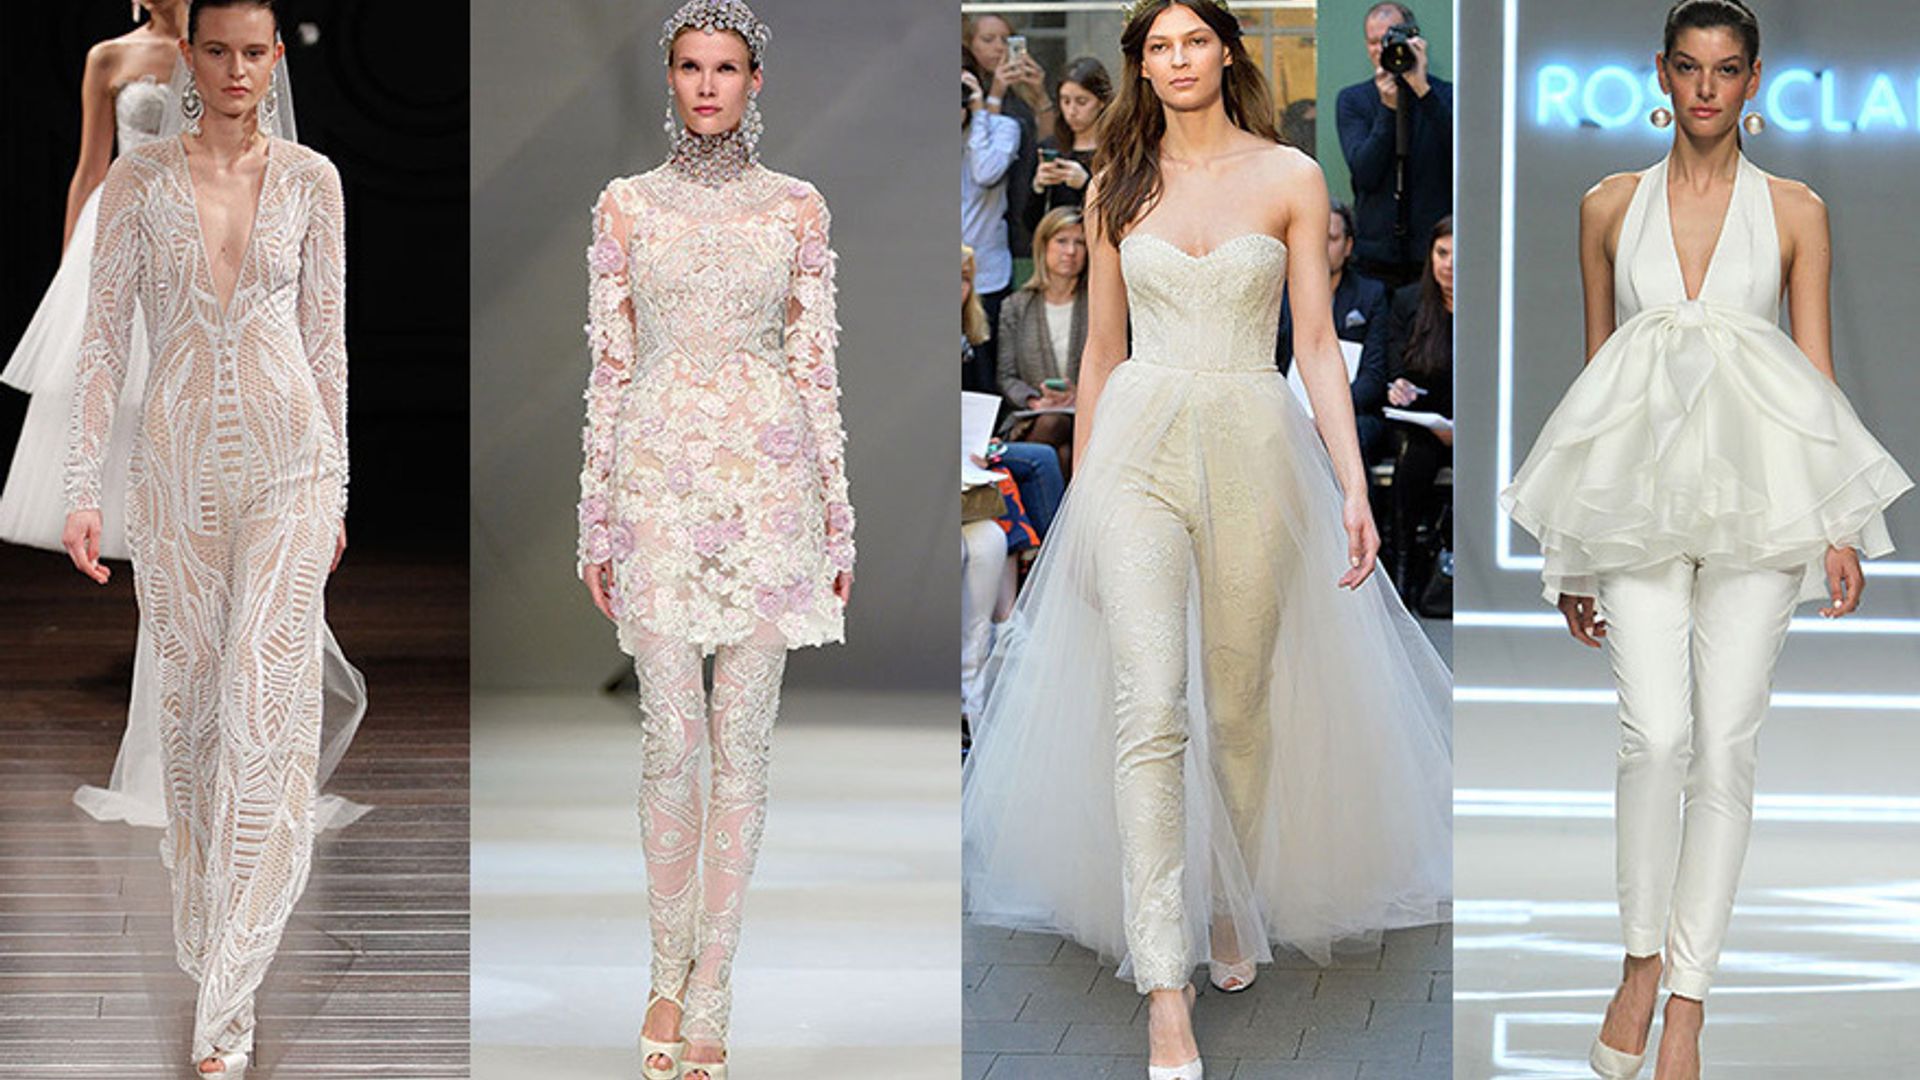 2021 Wedding Dress Trends That Are Getting Us Excited